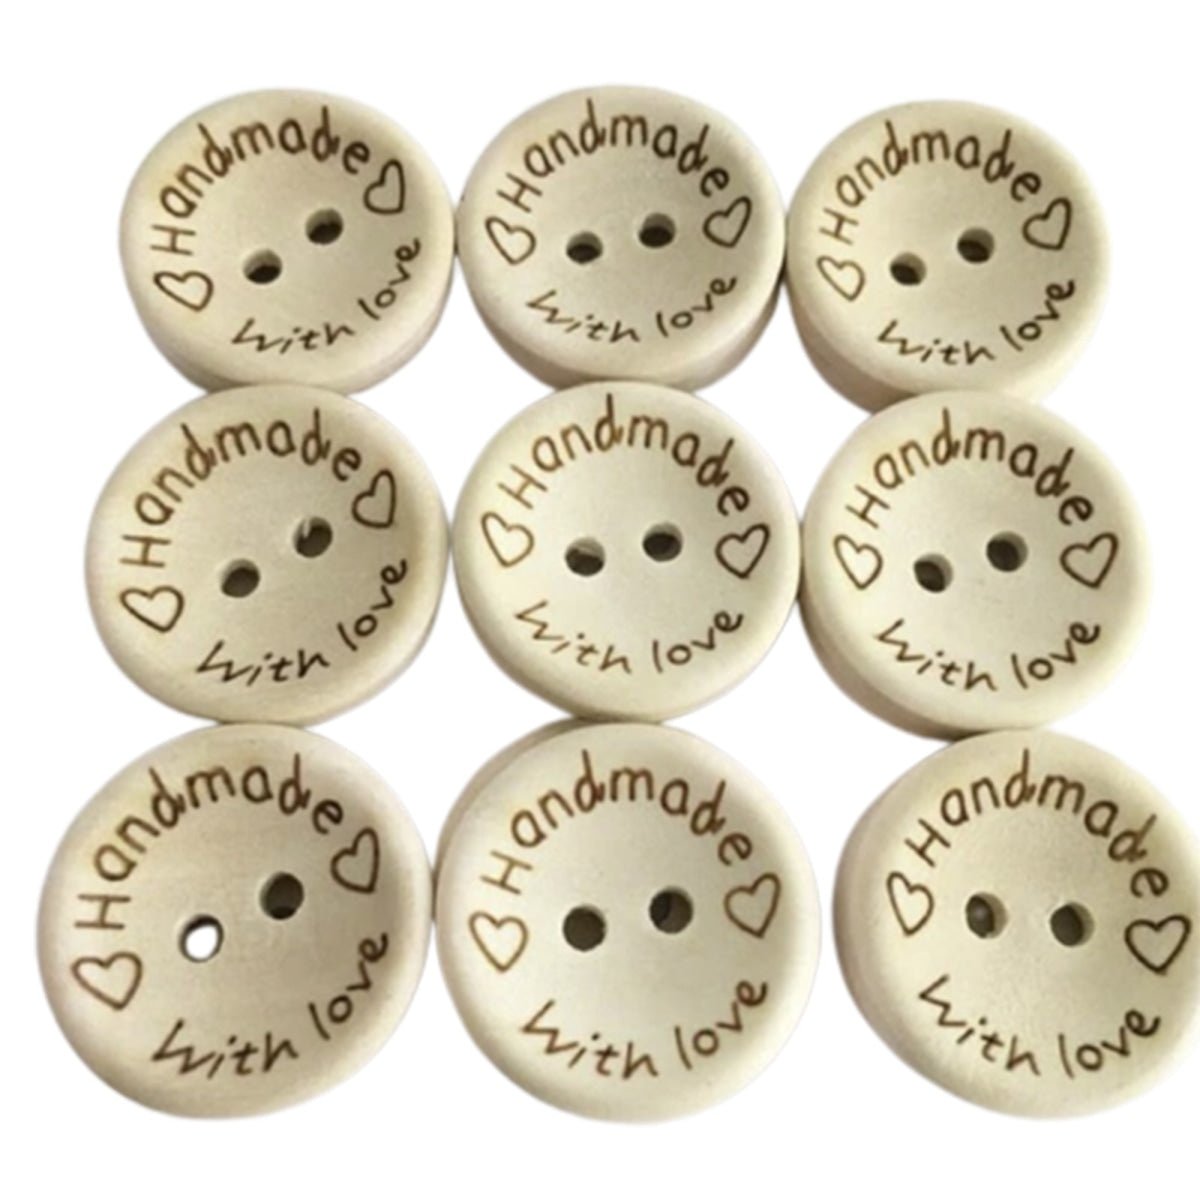 25pcs Wooden Buttons 2-Holes Handmade with Love Round Button Handmade Clothes - 15mm "Handmade with Love" - - Asia Sell